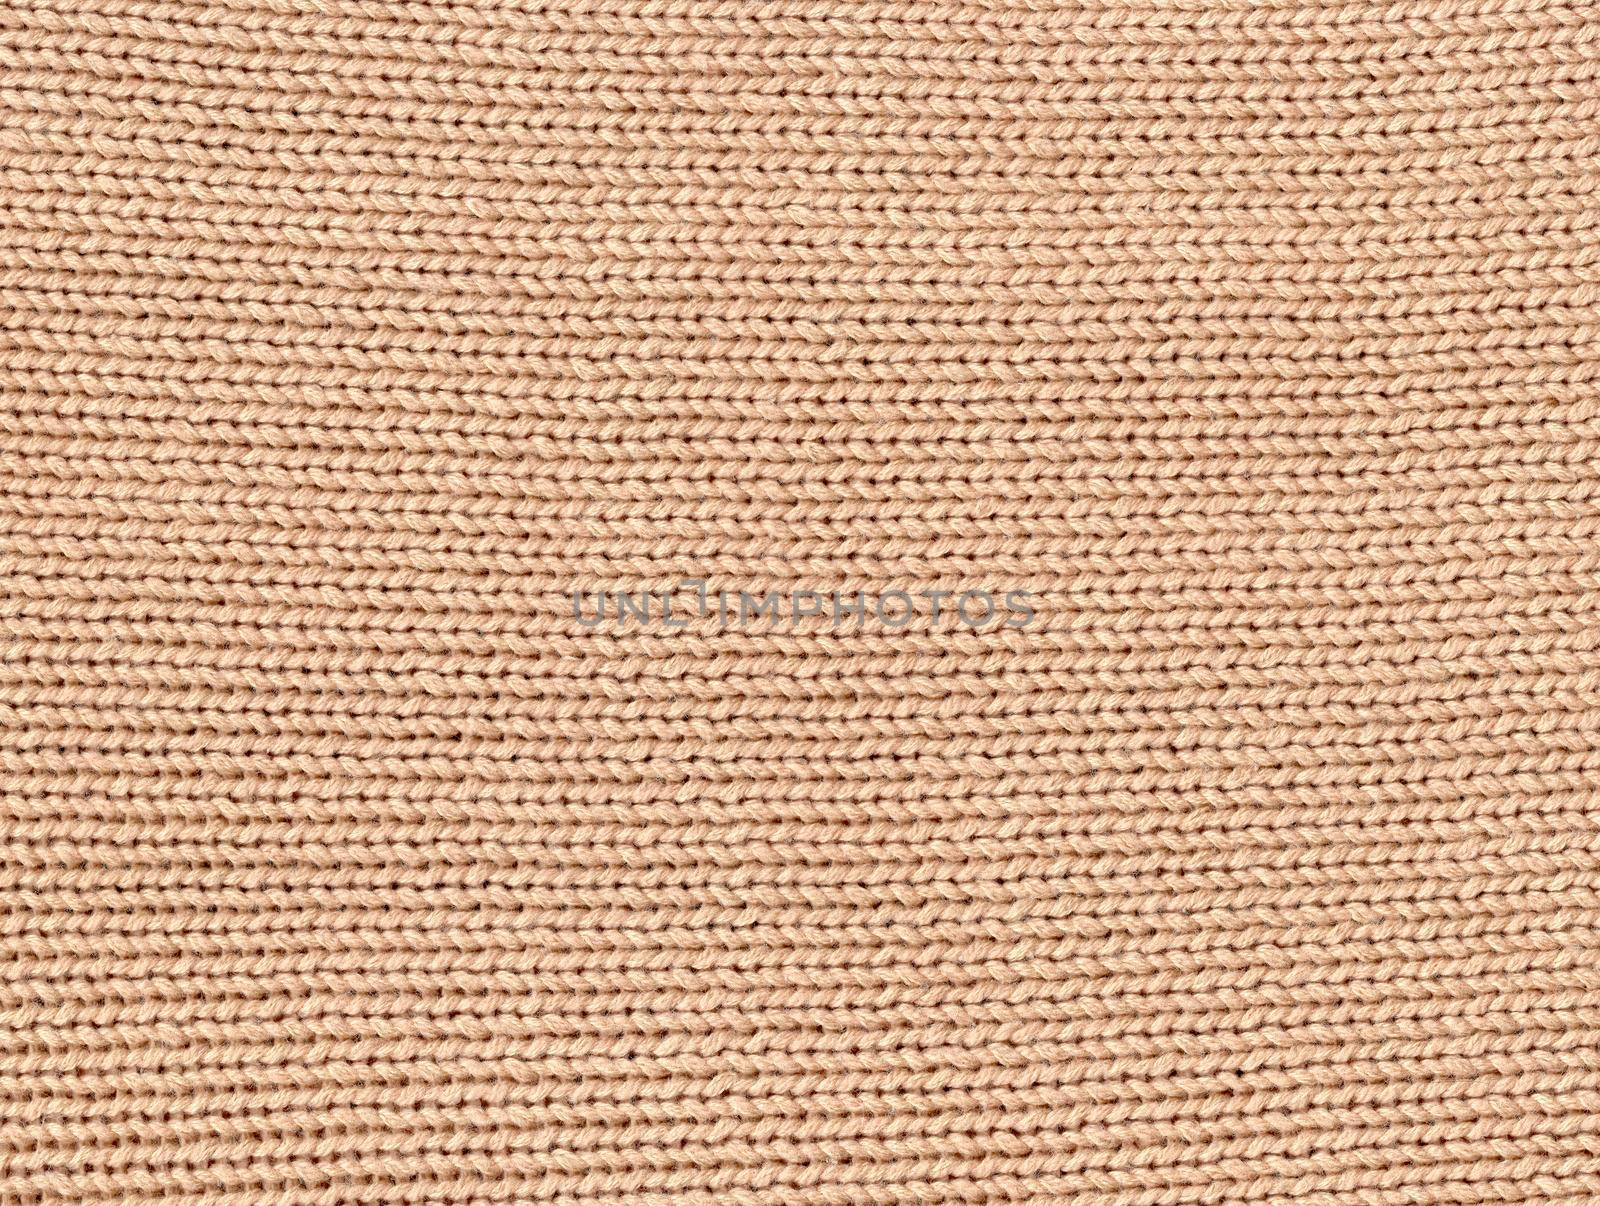 Beige knitted pattern background. Crochet fabric texture.